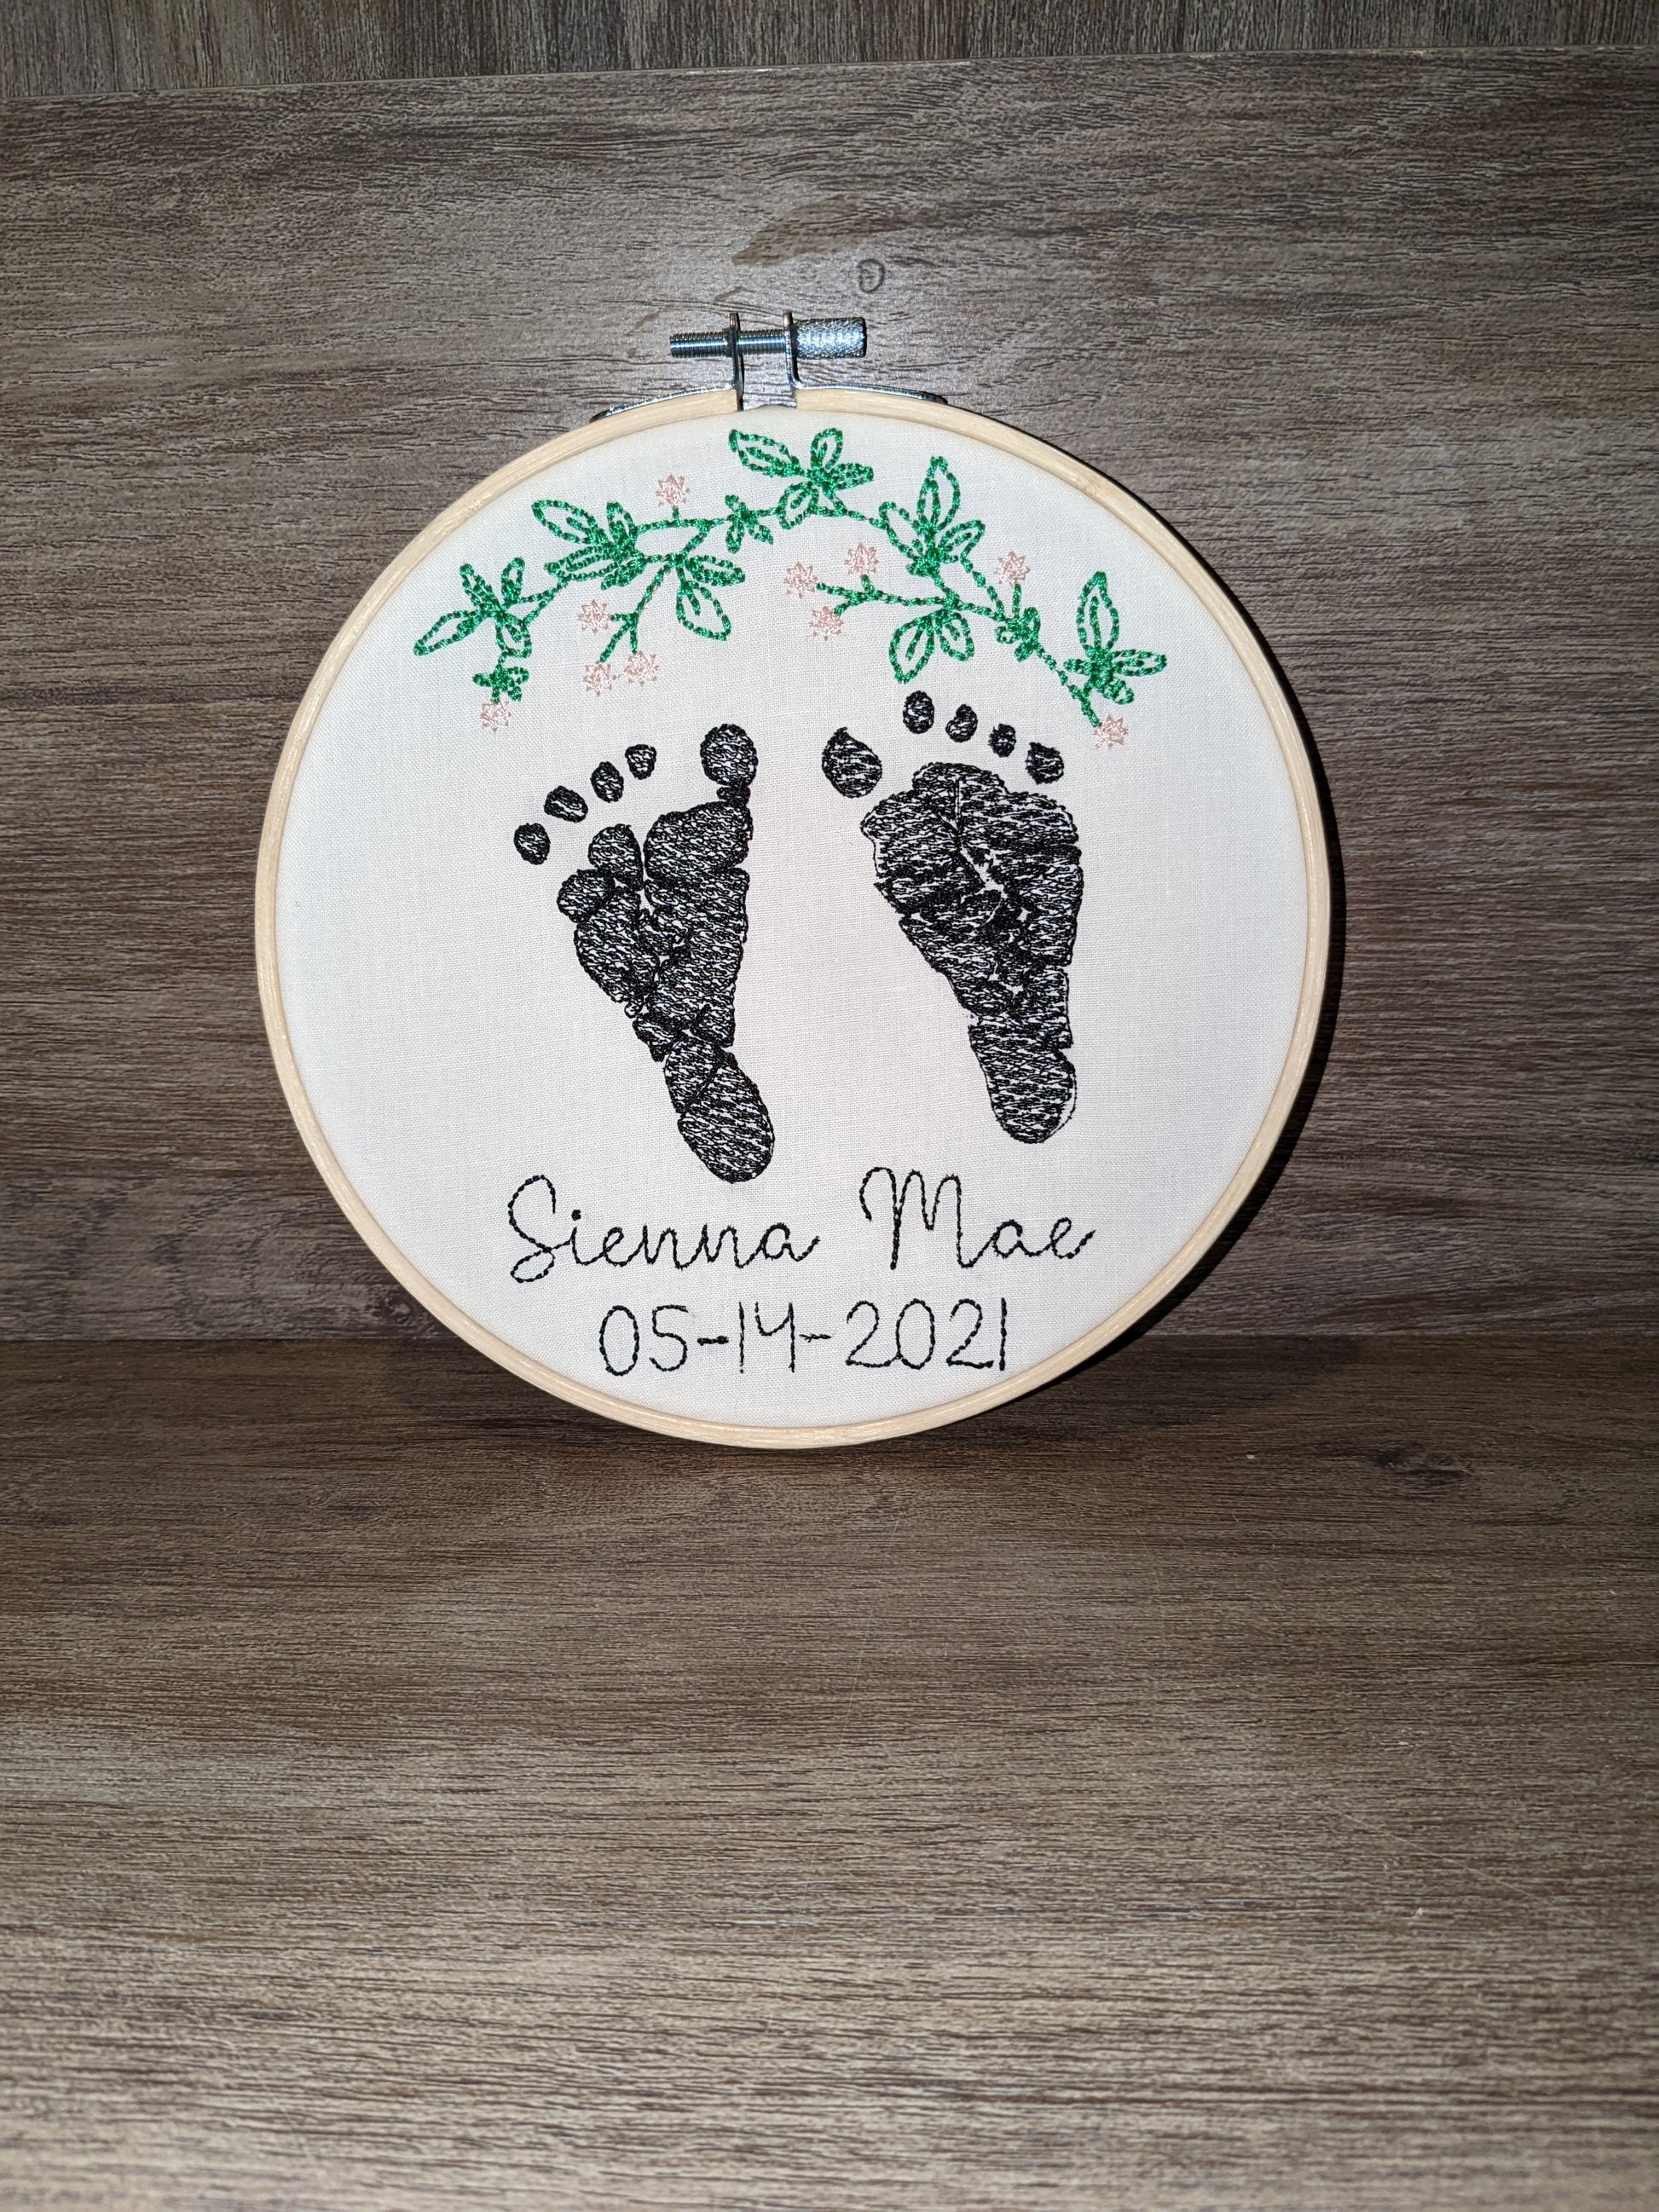 Embroidered baby feet with floral leaf design